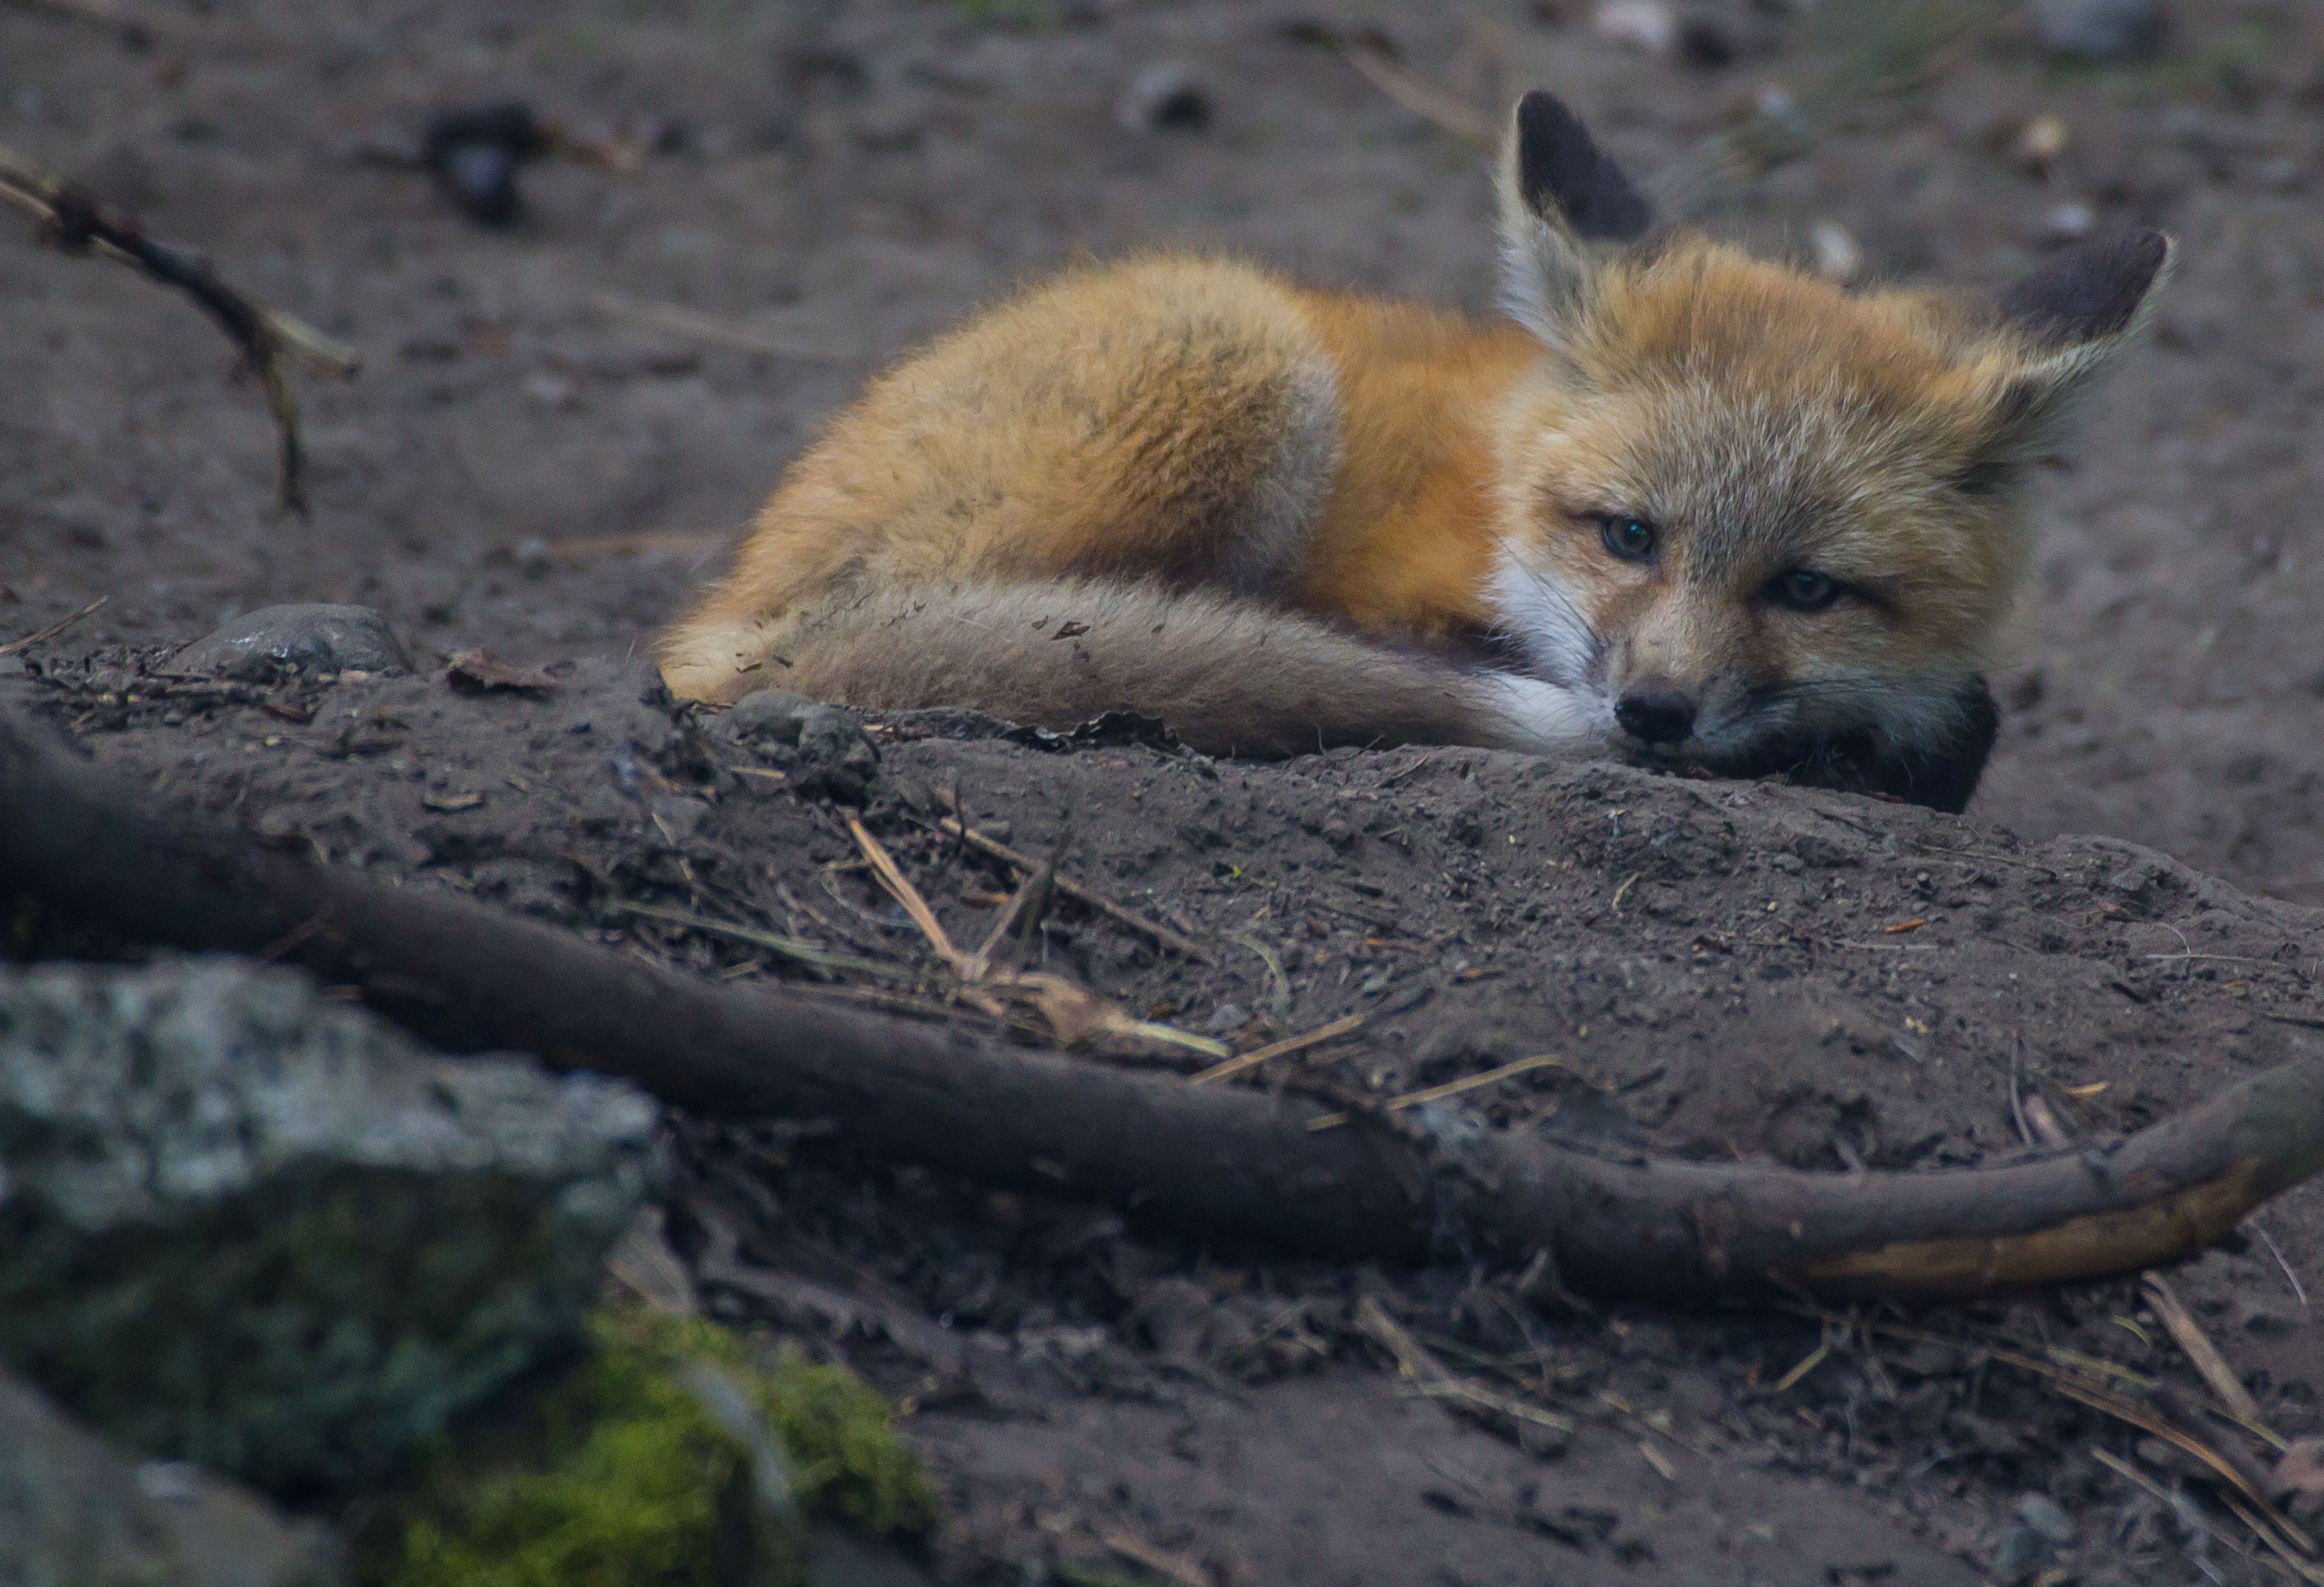 A small red fox curled up in the dirt